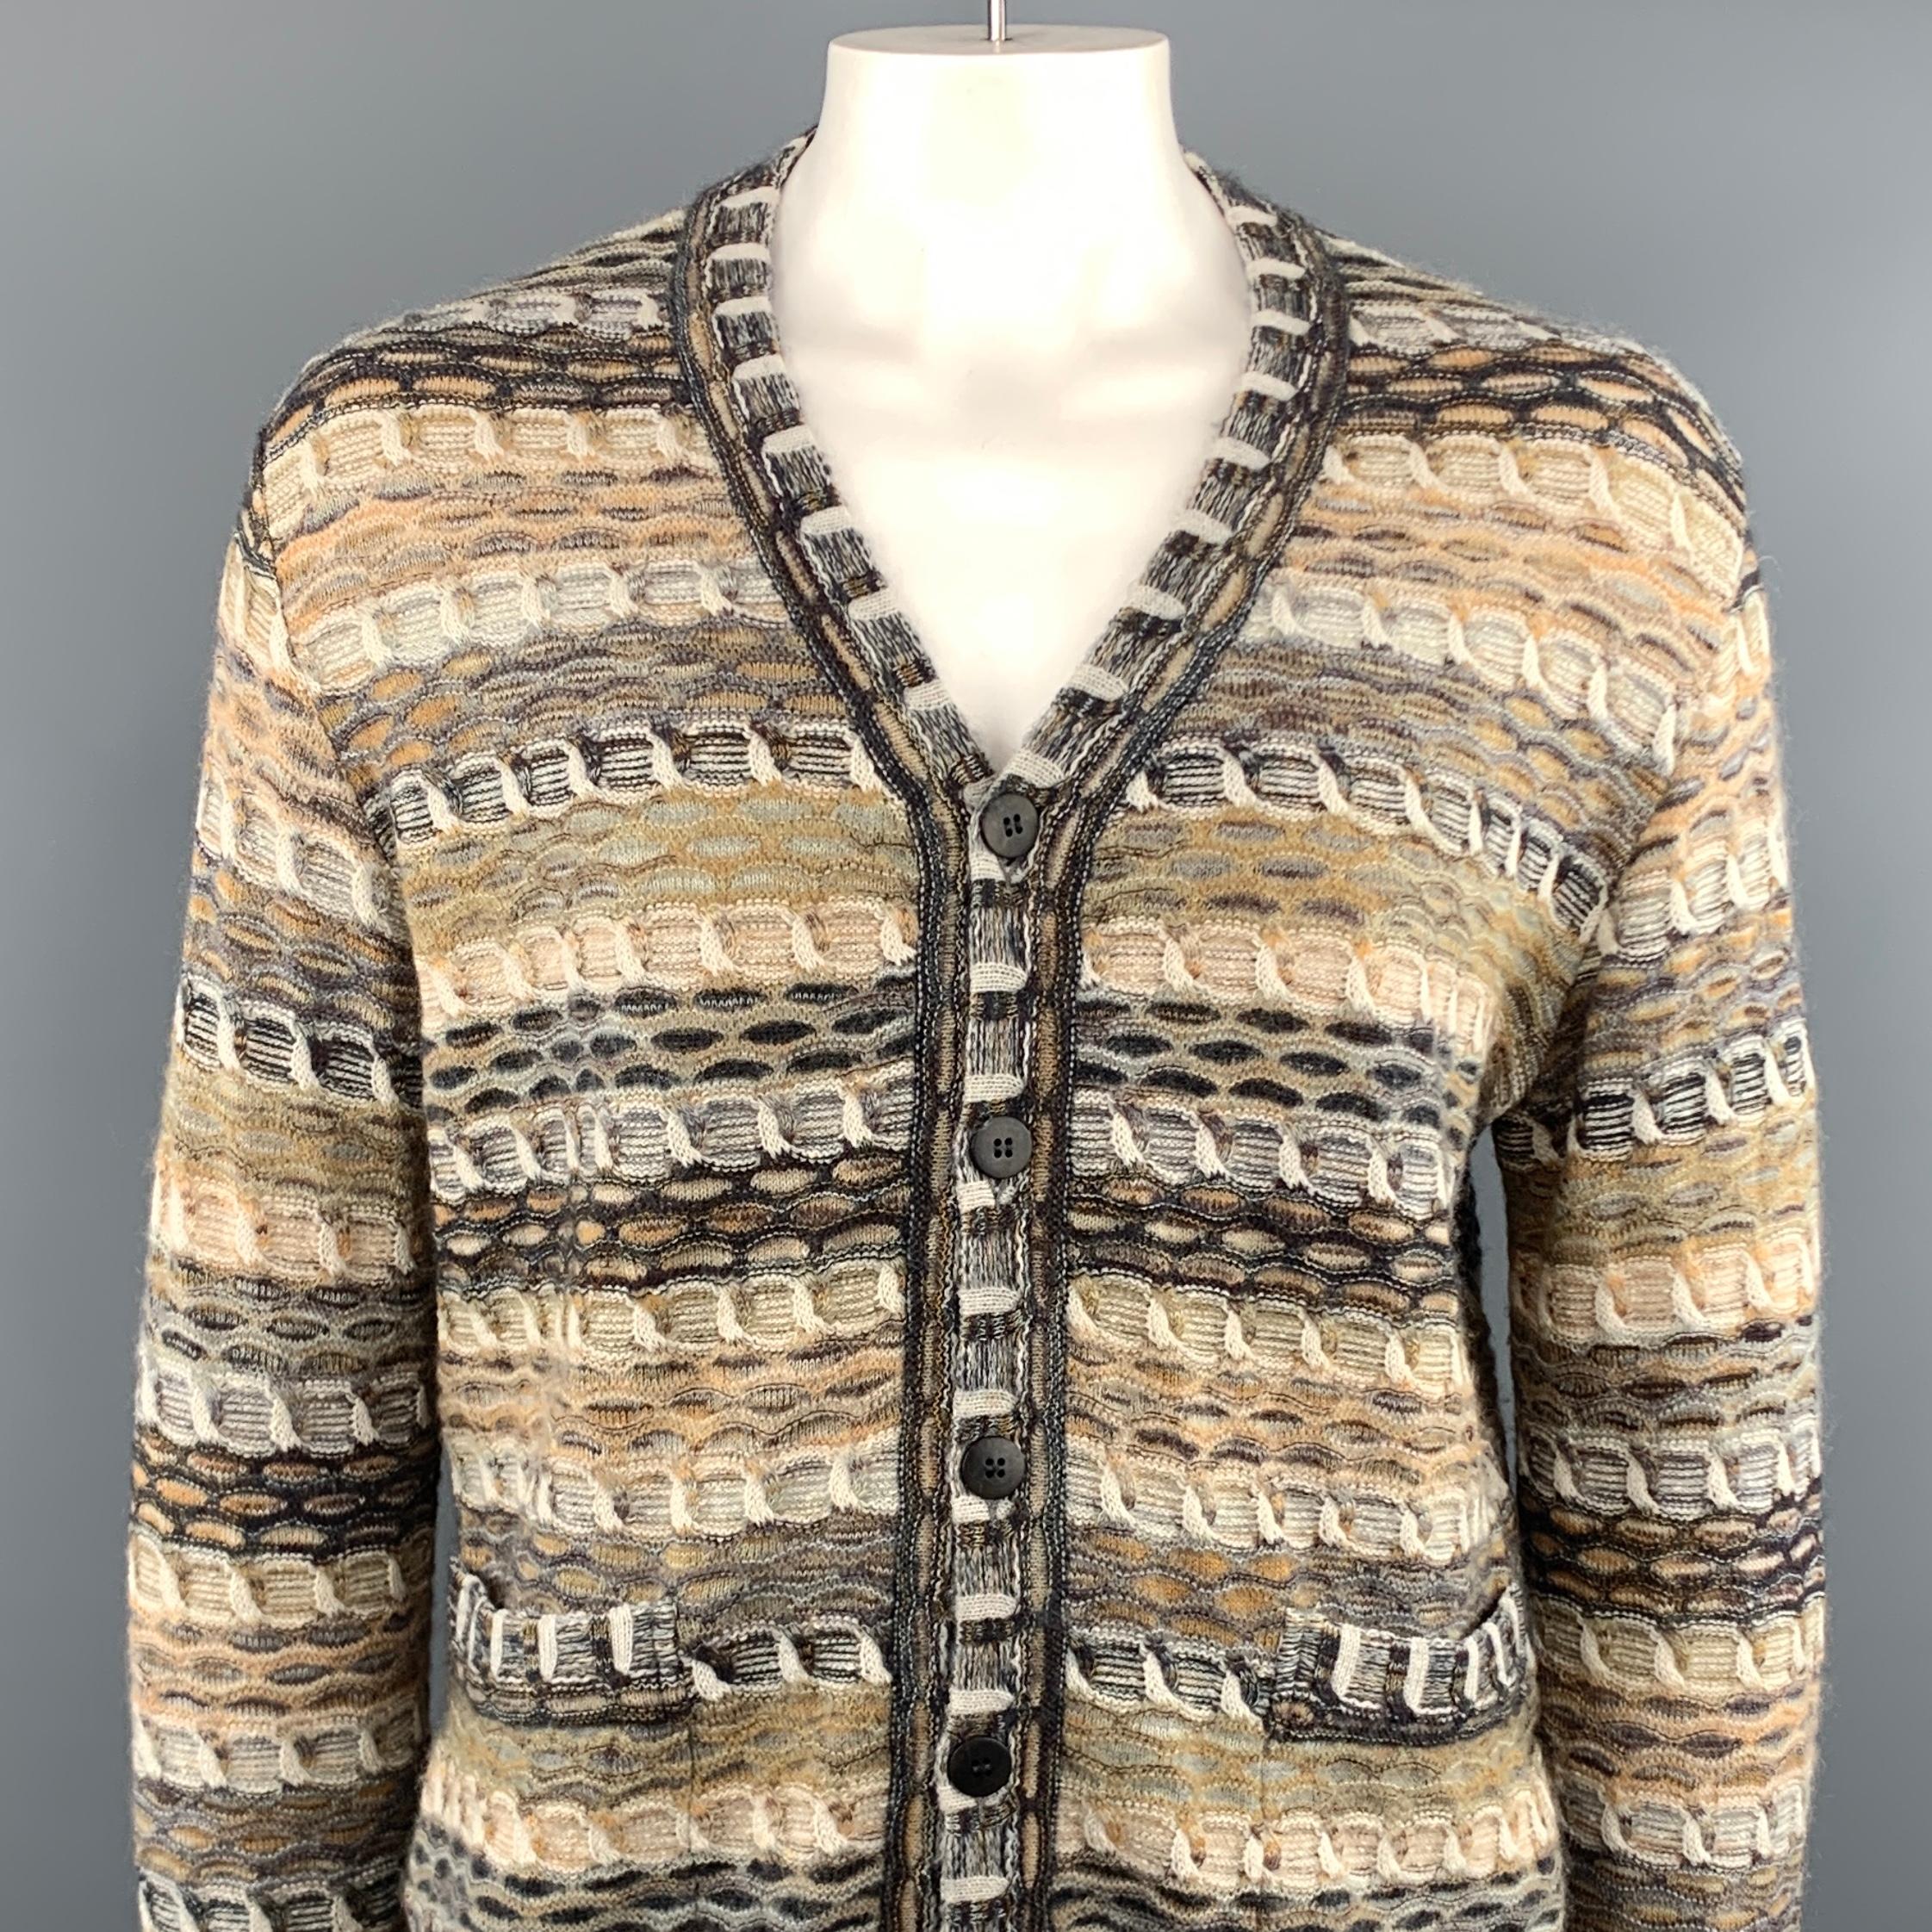 MISSONI cardigan comes in a beige melange wool blend featuring a buttoned closure and patch pockets. Made in Italy.
 
Excellent Pre-Owned Condition.
Marked: 50
 
Measurements:
 
Shoulder: 21 in.
Chest: 46 in.
Sleeve: 29 in.
Length: 27.5 in